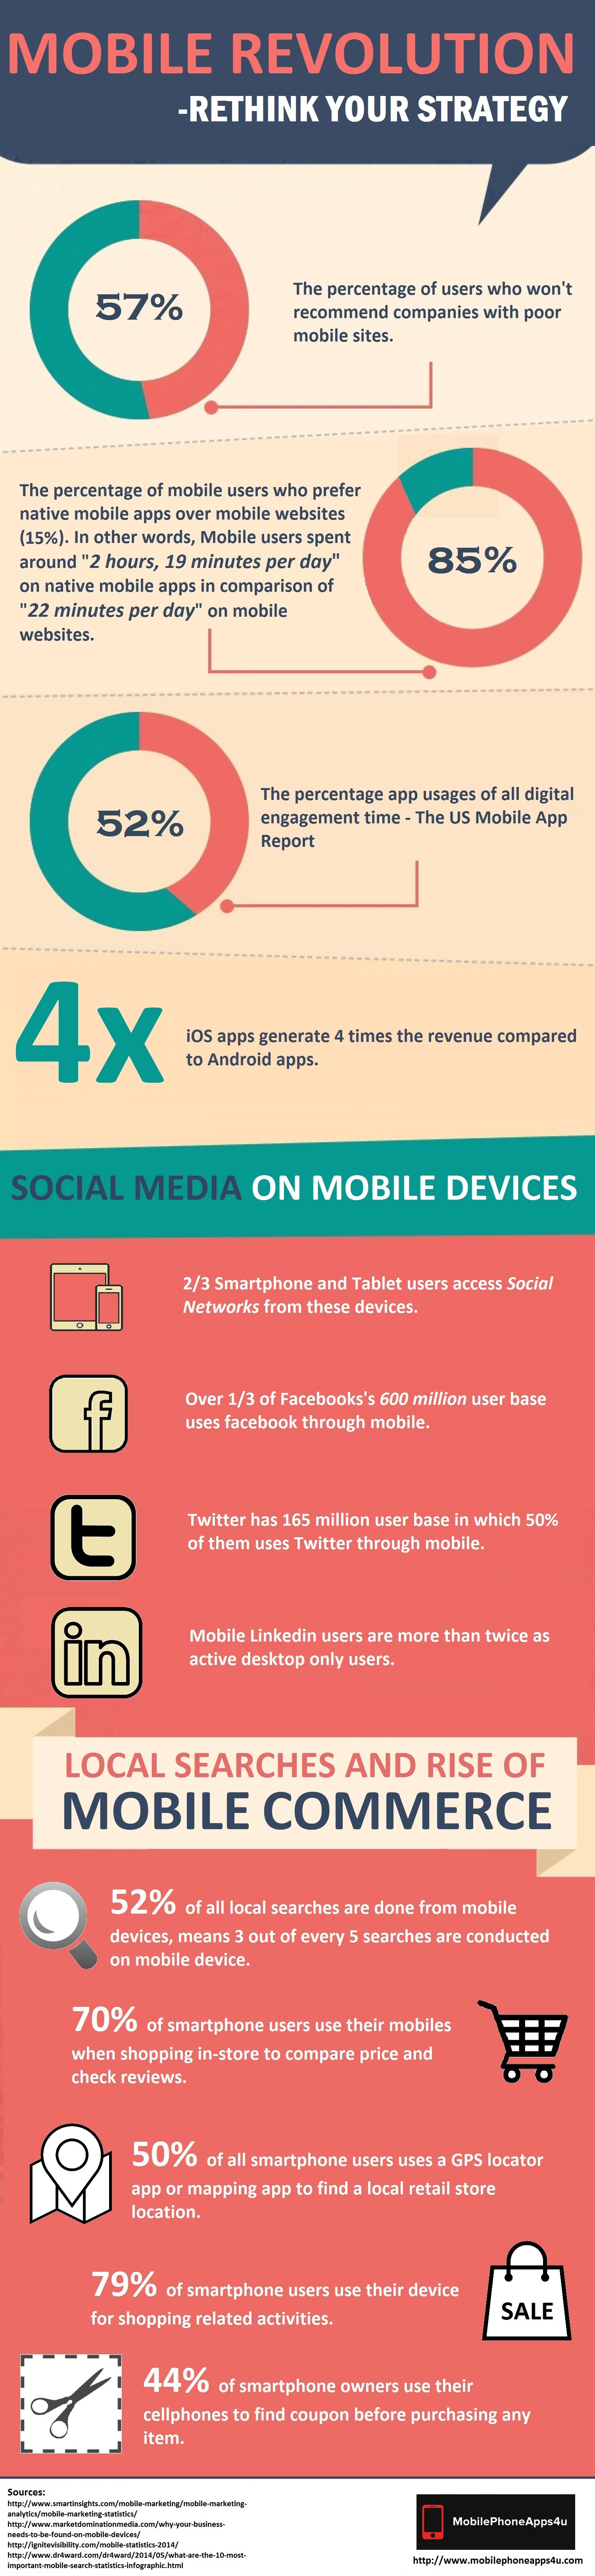 [Infographic] Mobile Revolution 2014 – Rethink Your Strategy Infographic